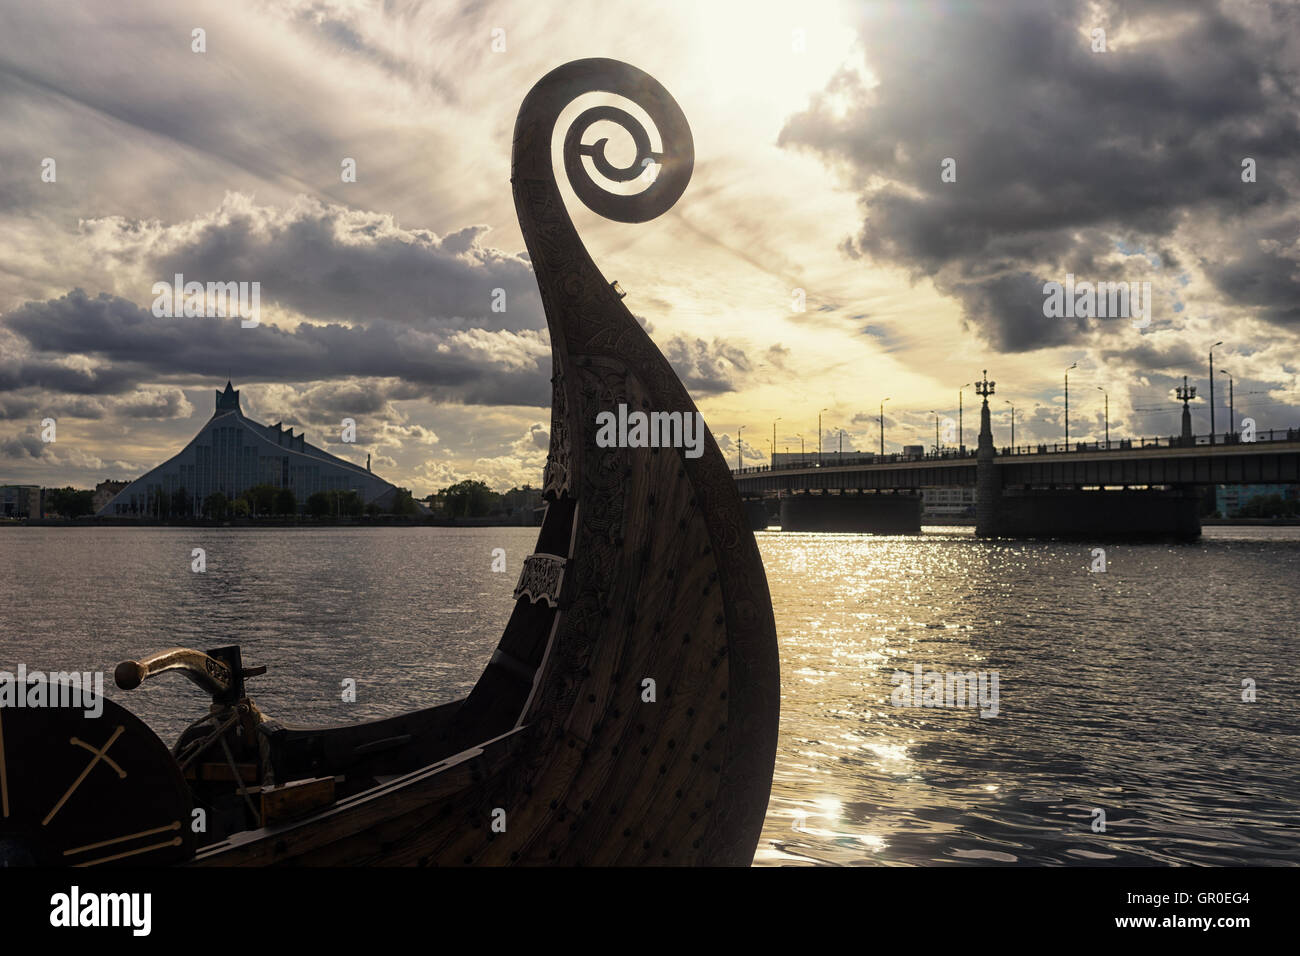 Nose Viking boat on the River Daugava on the background of the Latvian National Library and the Stone Bridge Stock Photo